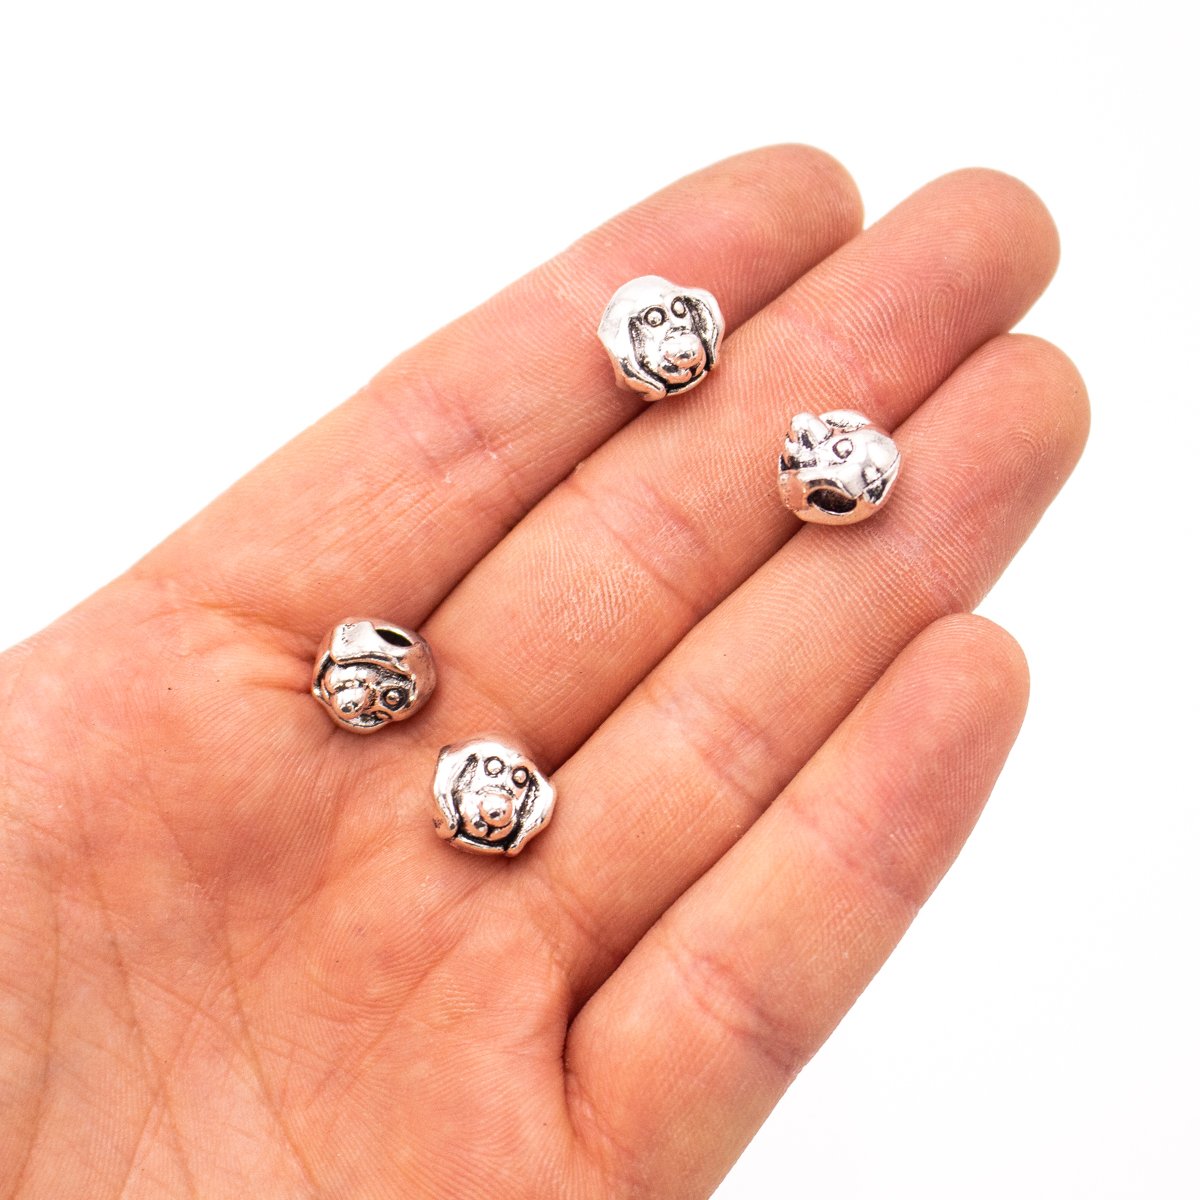 10PCS For 5mm leather antique silver zamak 5mm round beads Jewelry supply Findings Components- D-5-5-159